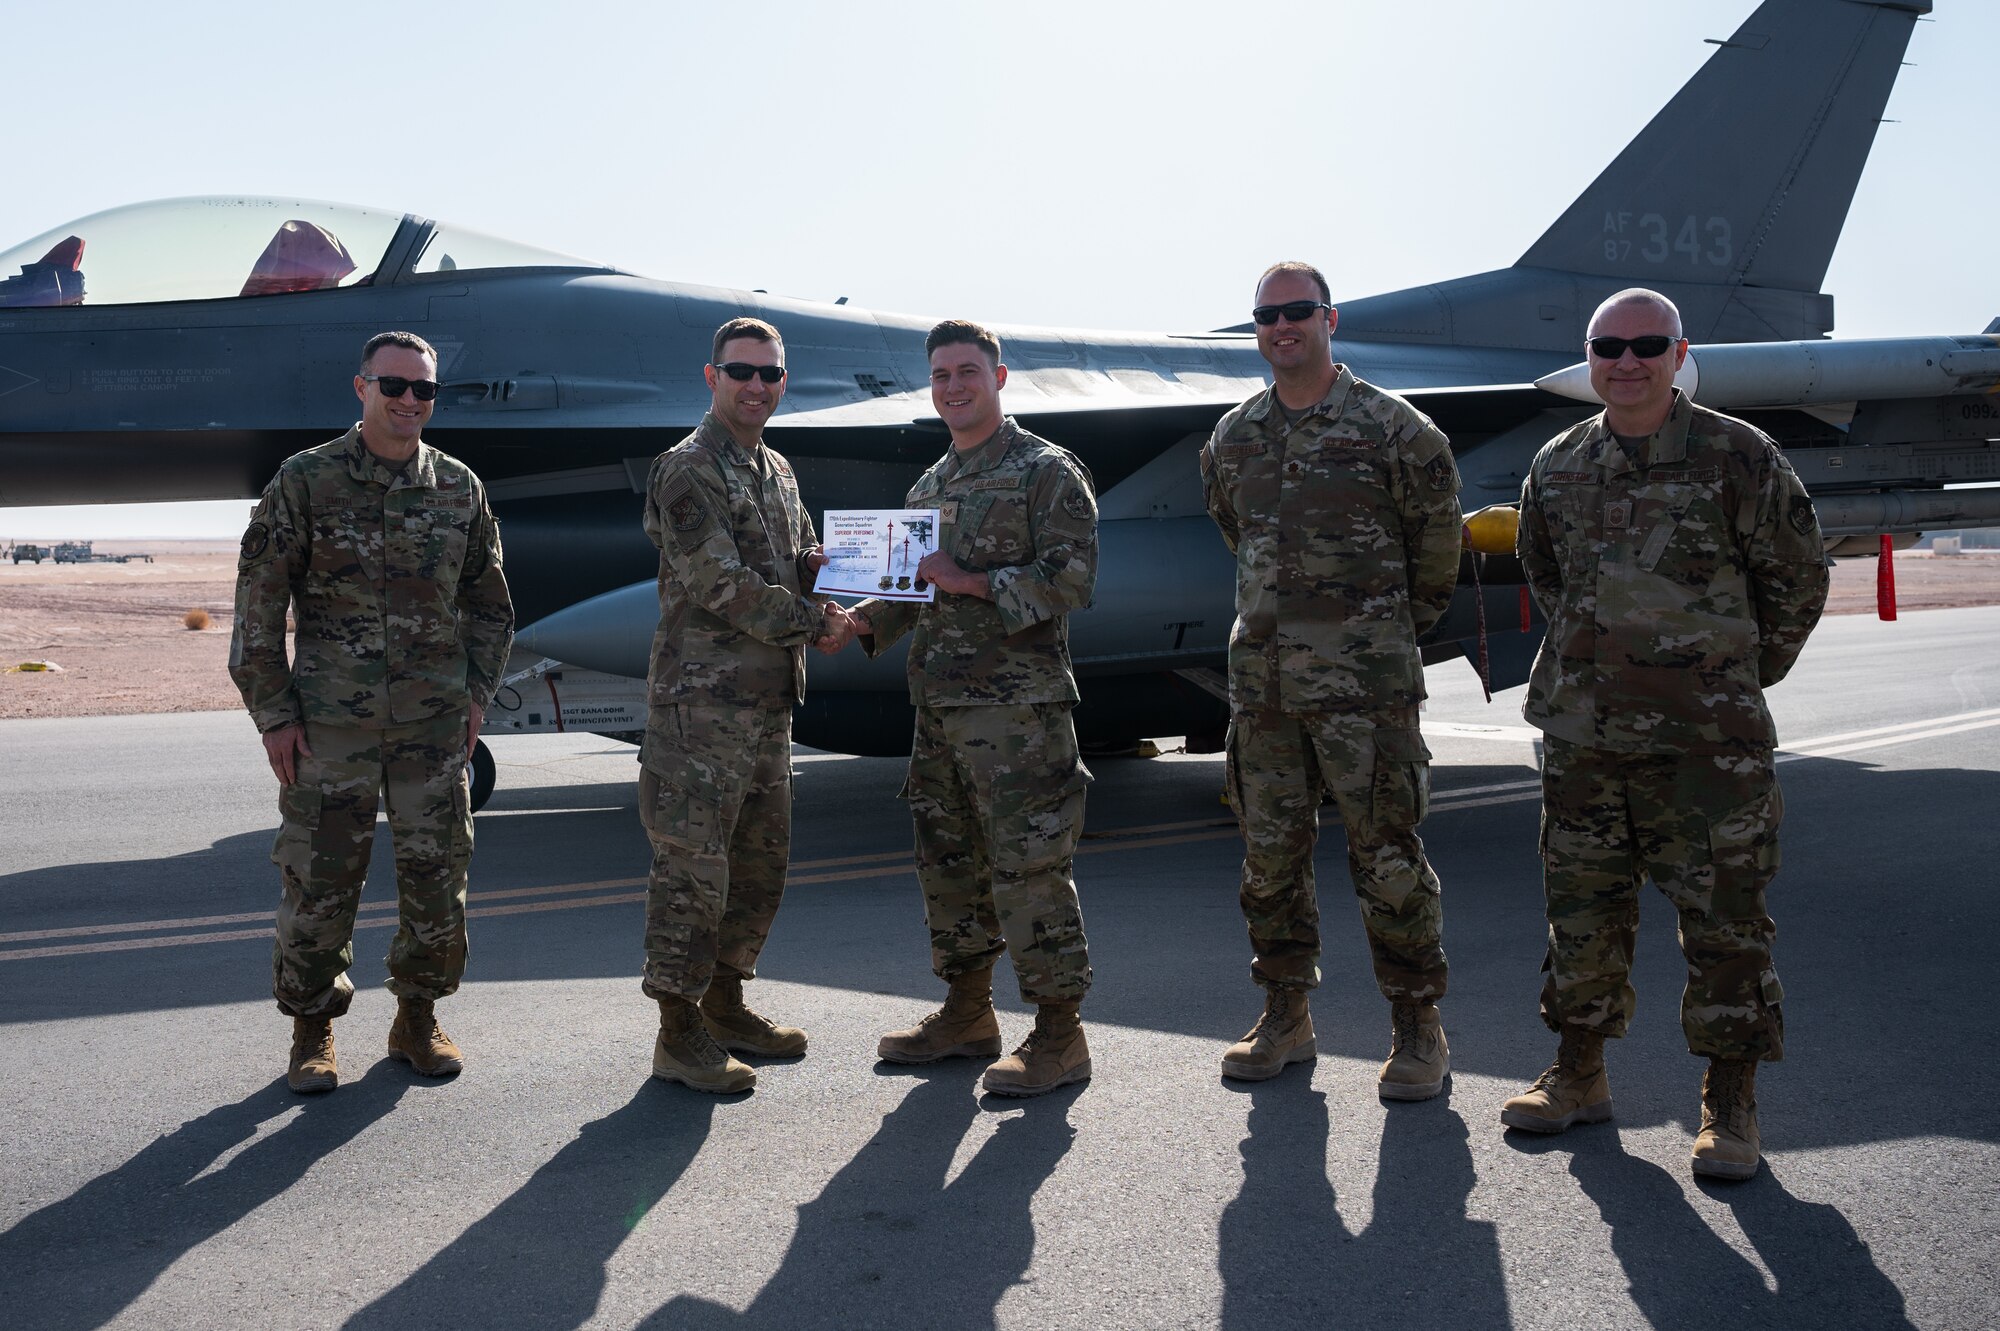 Staff Sgt. Adam Pipp, 176th Expeditionary Fighter Squadron aerospace ground equipment craftsman, receives a superior performer certificate from Brig. Gen. Robert Davis, 378th Air Expeditionary Wing commander, at Prince Sultan Air Base, Kingdom of Saudi Arabia, Nov. 23, 2021. Pipp was recognized for his superior performance in Iron Falcon 2021, a bilateral training exercise with Saudi coalition partners. (U.S. Air Force photo by Senior Airman Jacob B. Wrightsman)